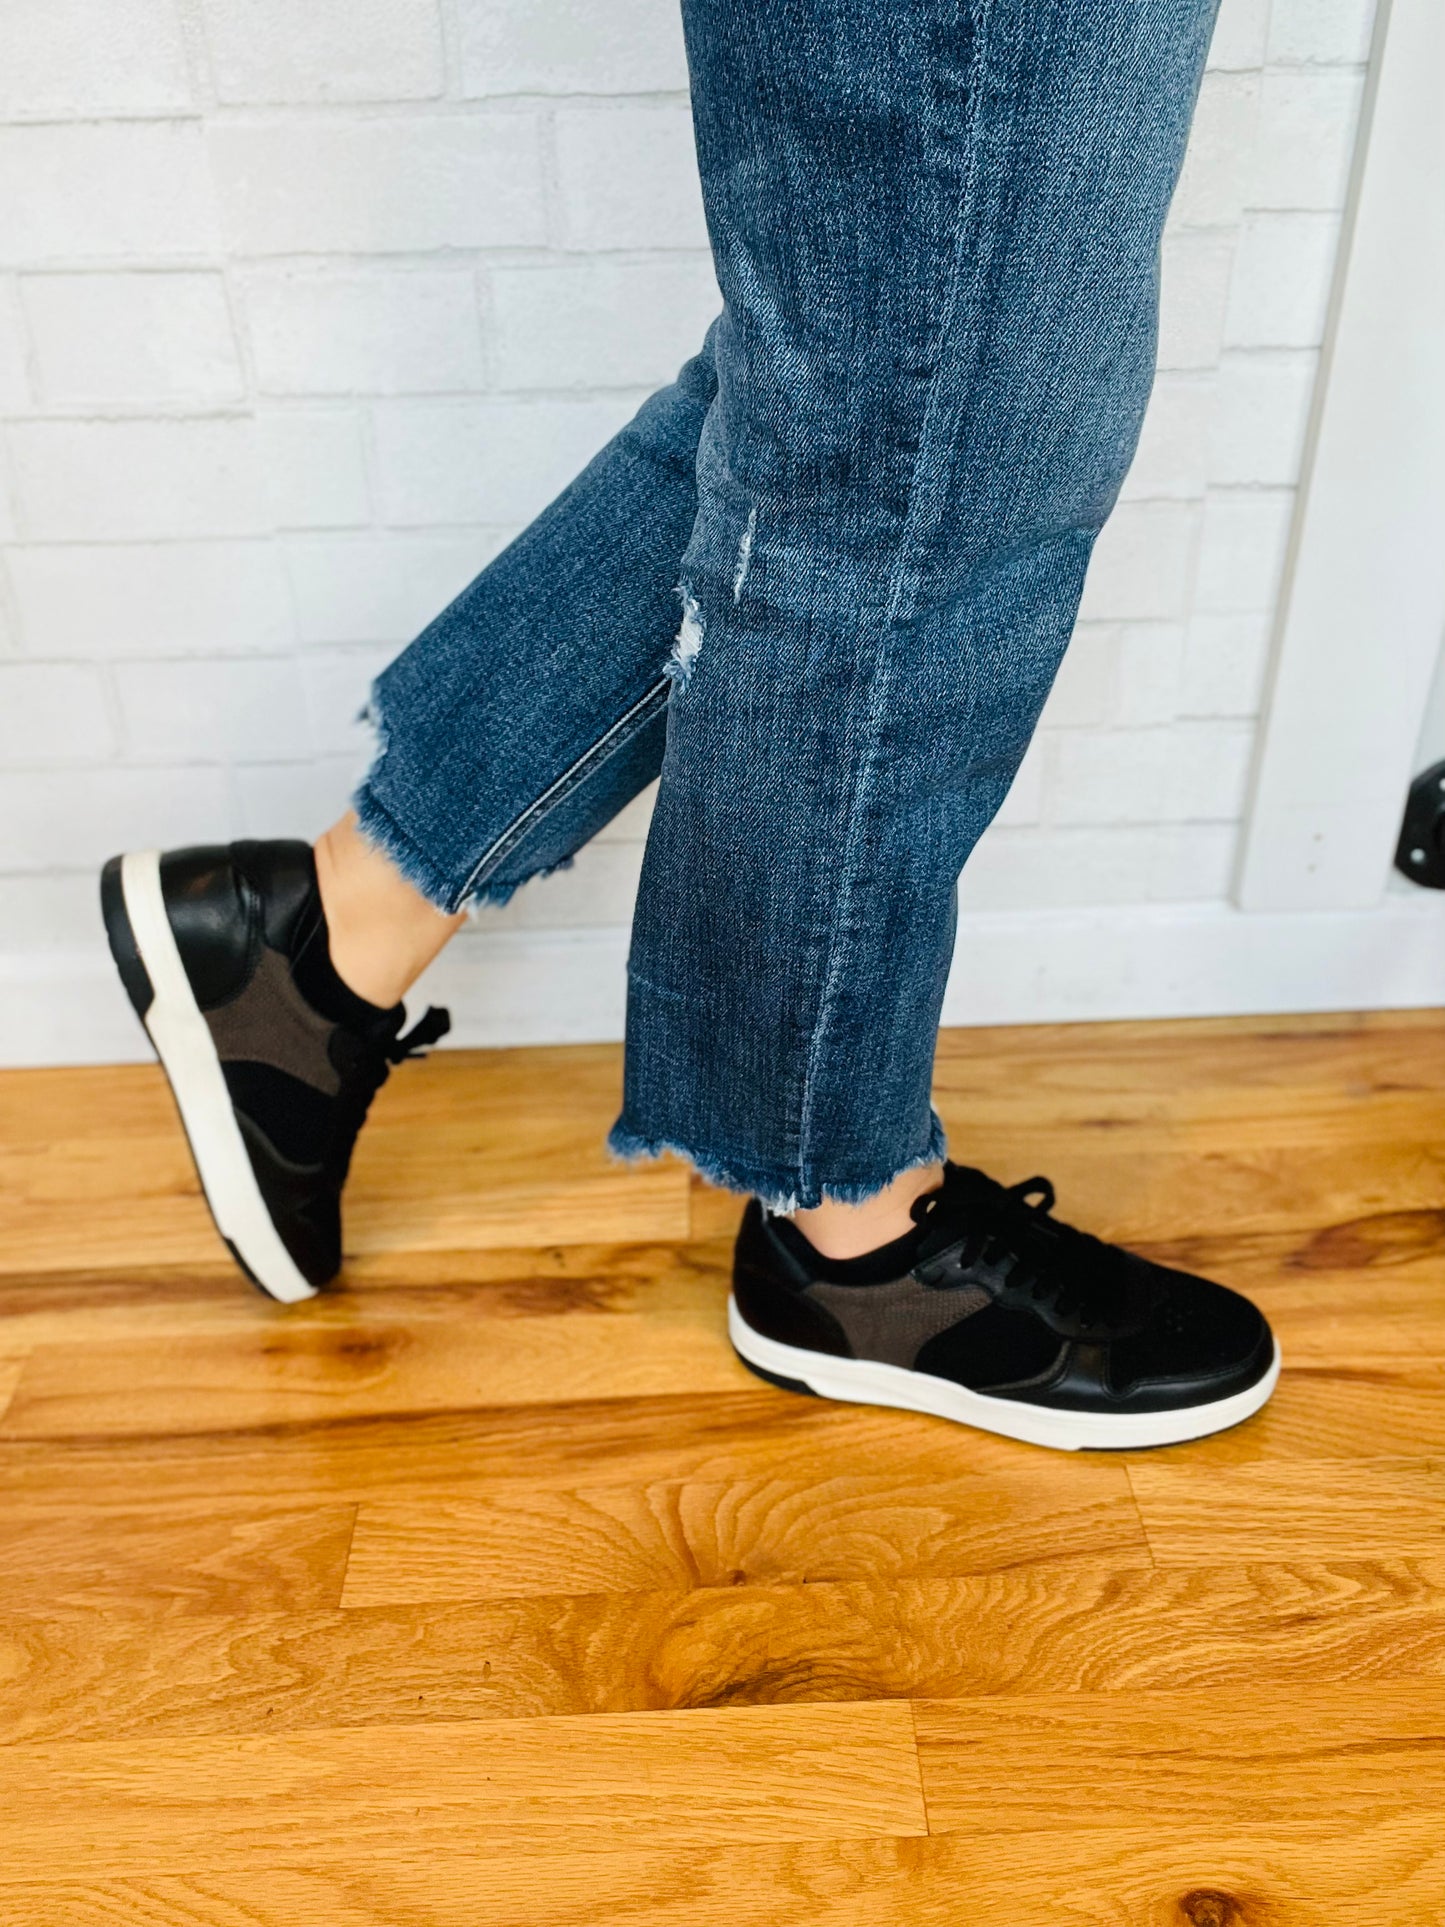 Retro sport styles are having a moment. Add the newest look to your wardrobe in the NILANA sneakers.  1.25" heel height 1" platform height Faux leather upper Rubber outsole